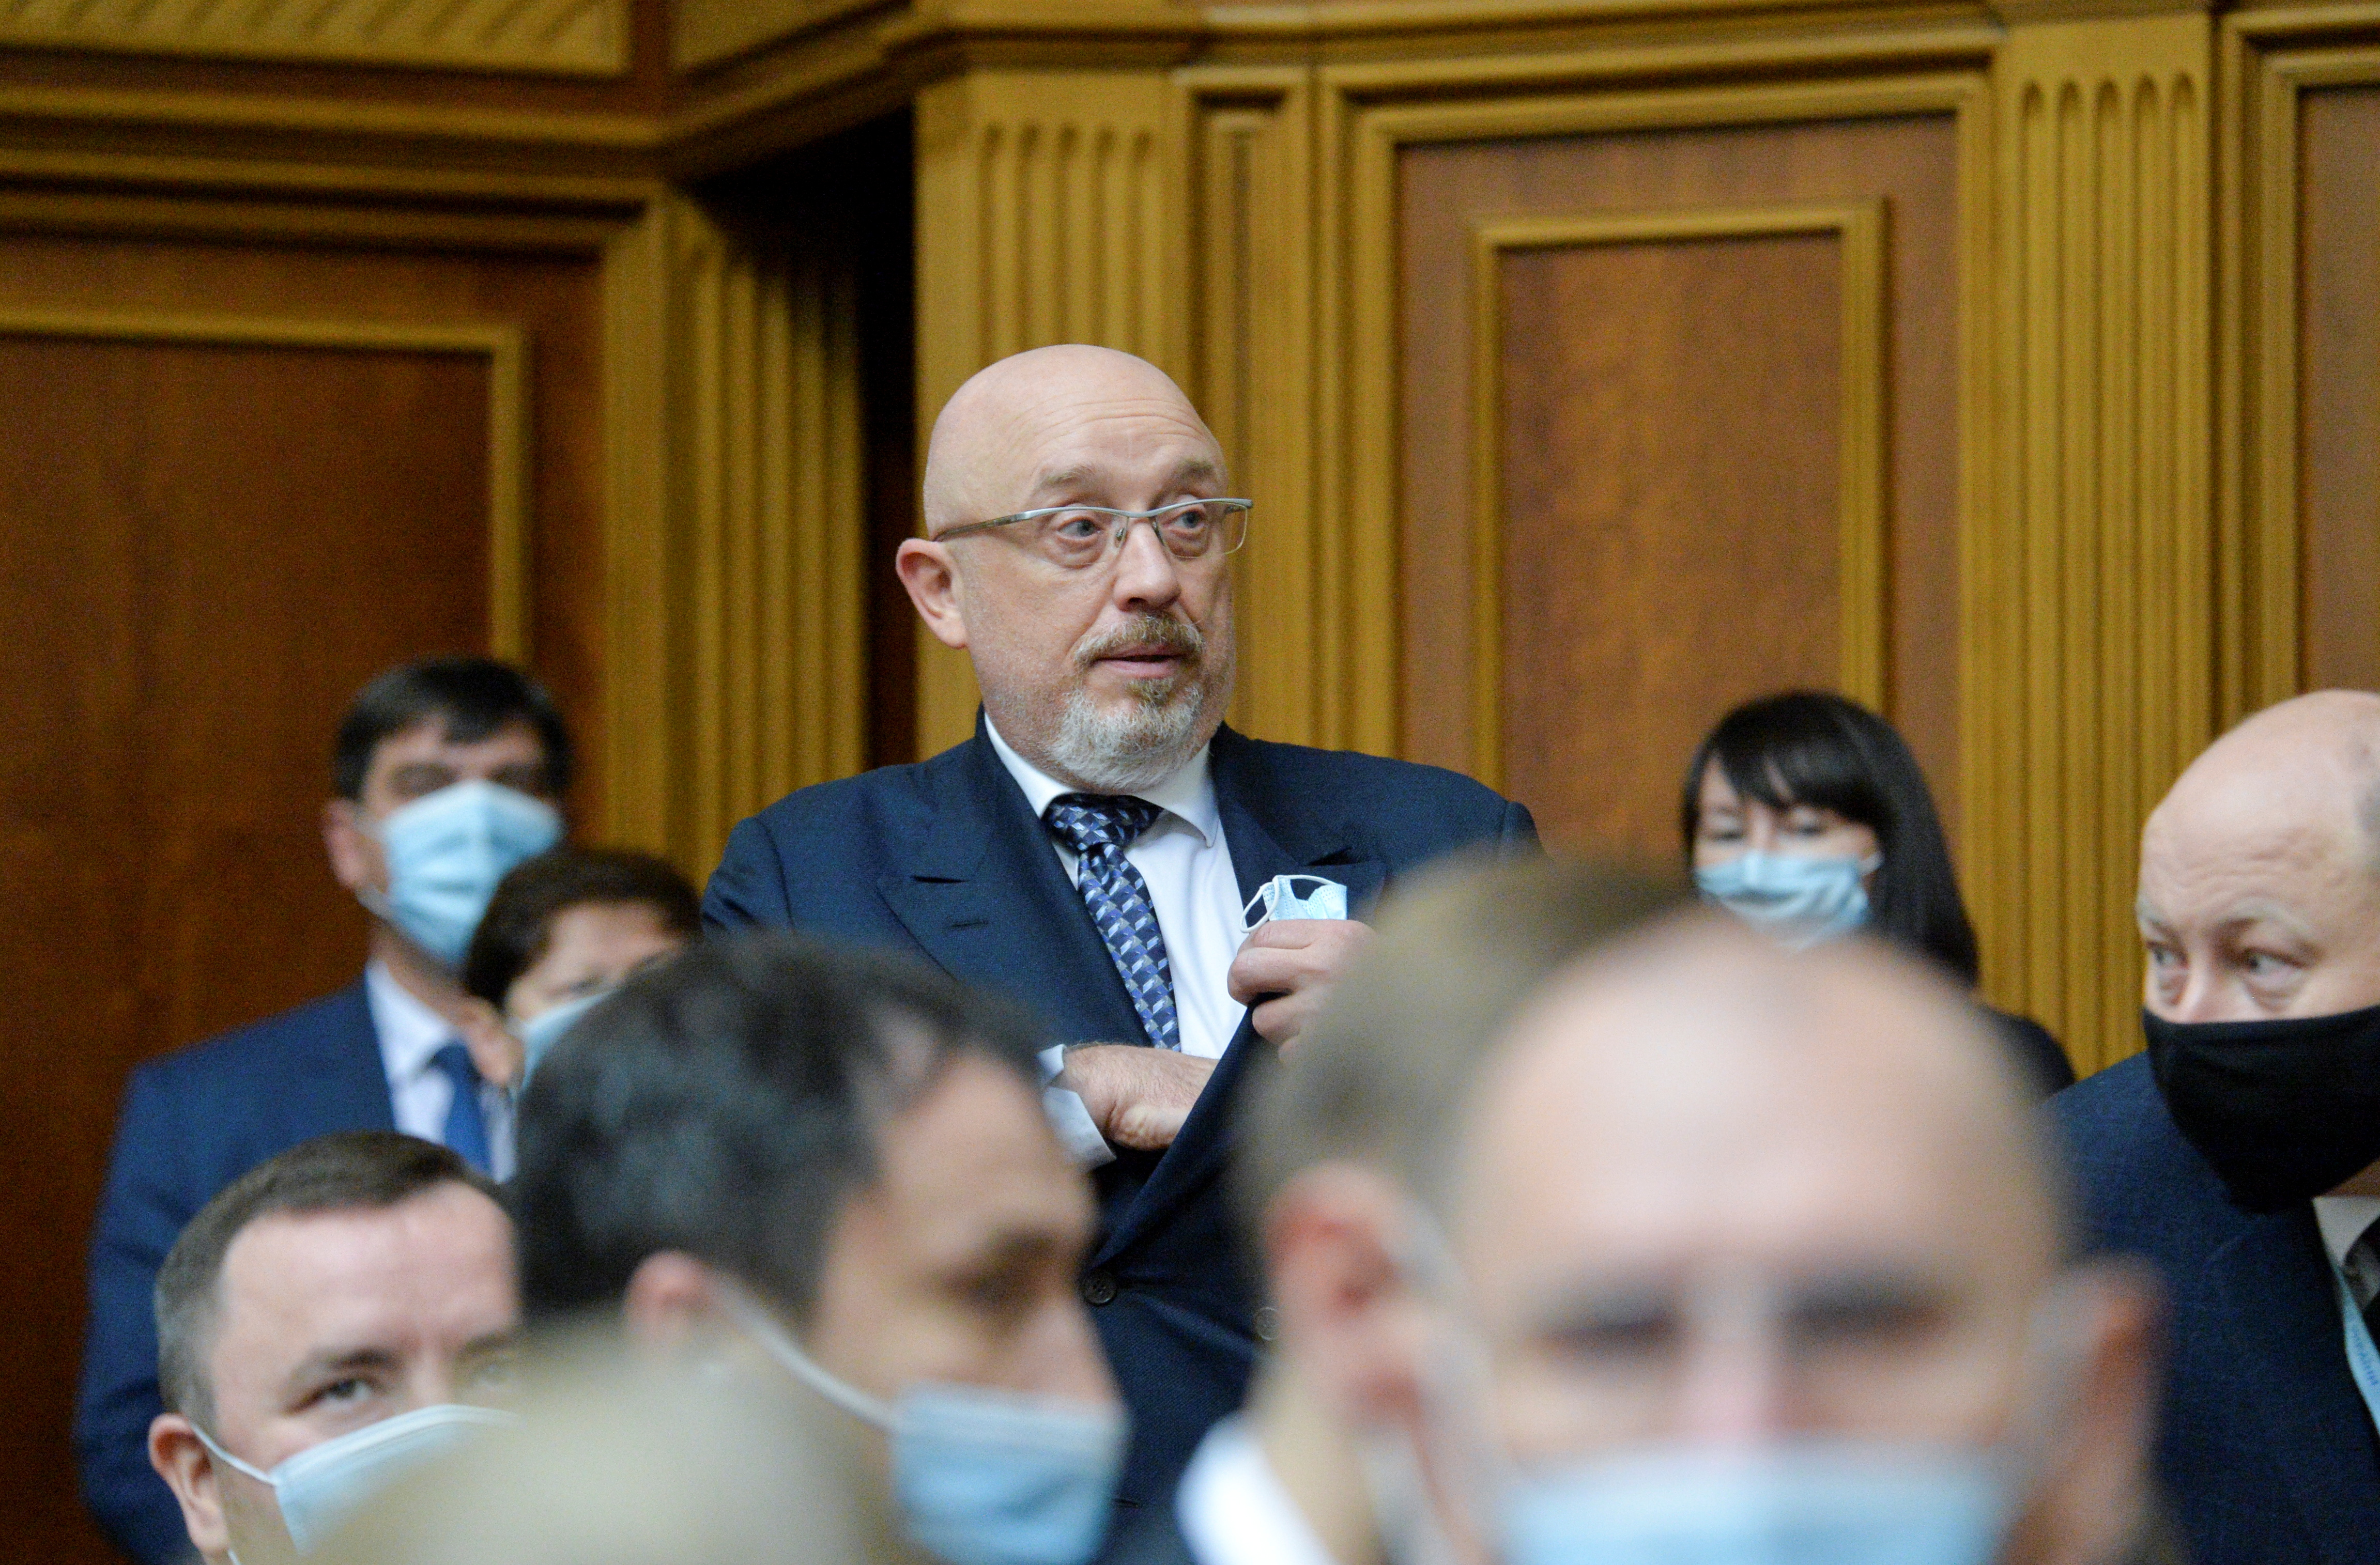 Ukraine's Defence Minister Oleksii Reznikov attends a session of parliament in Kyiv